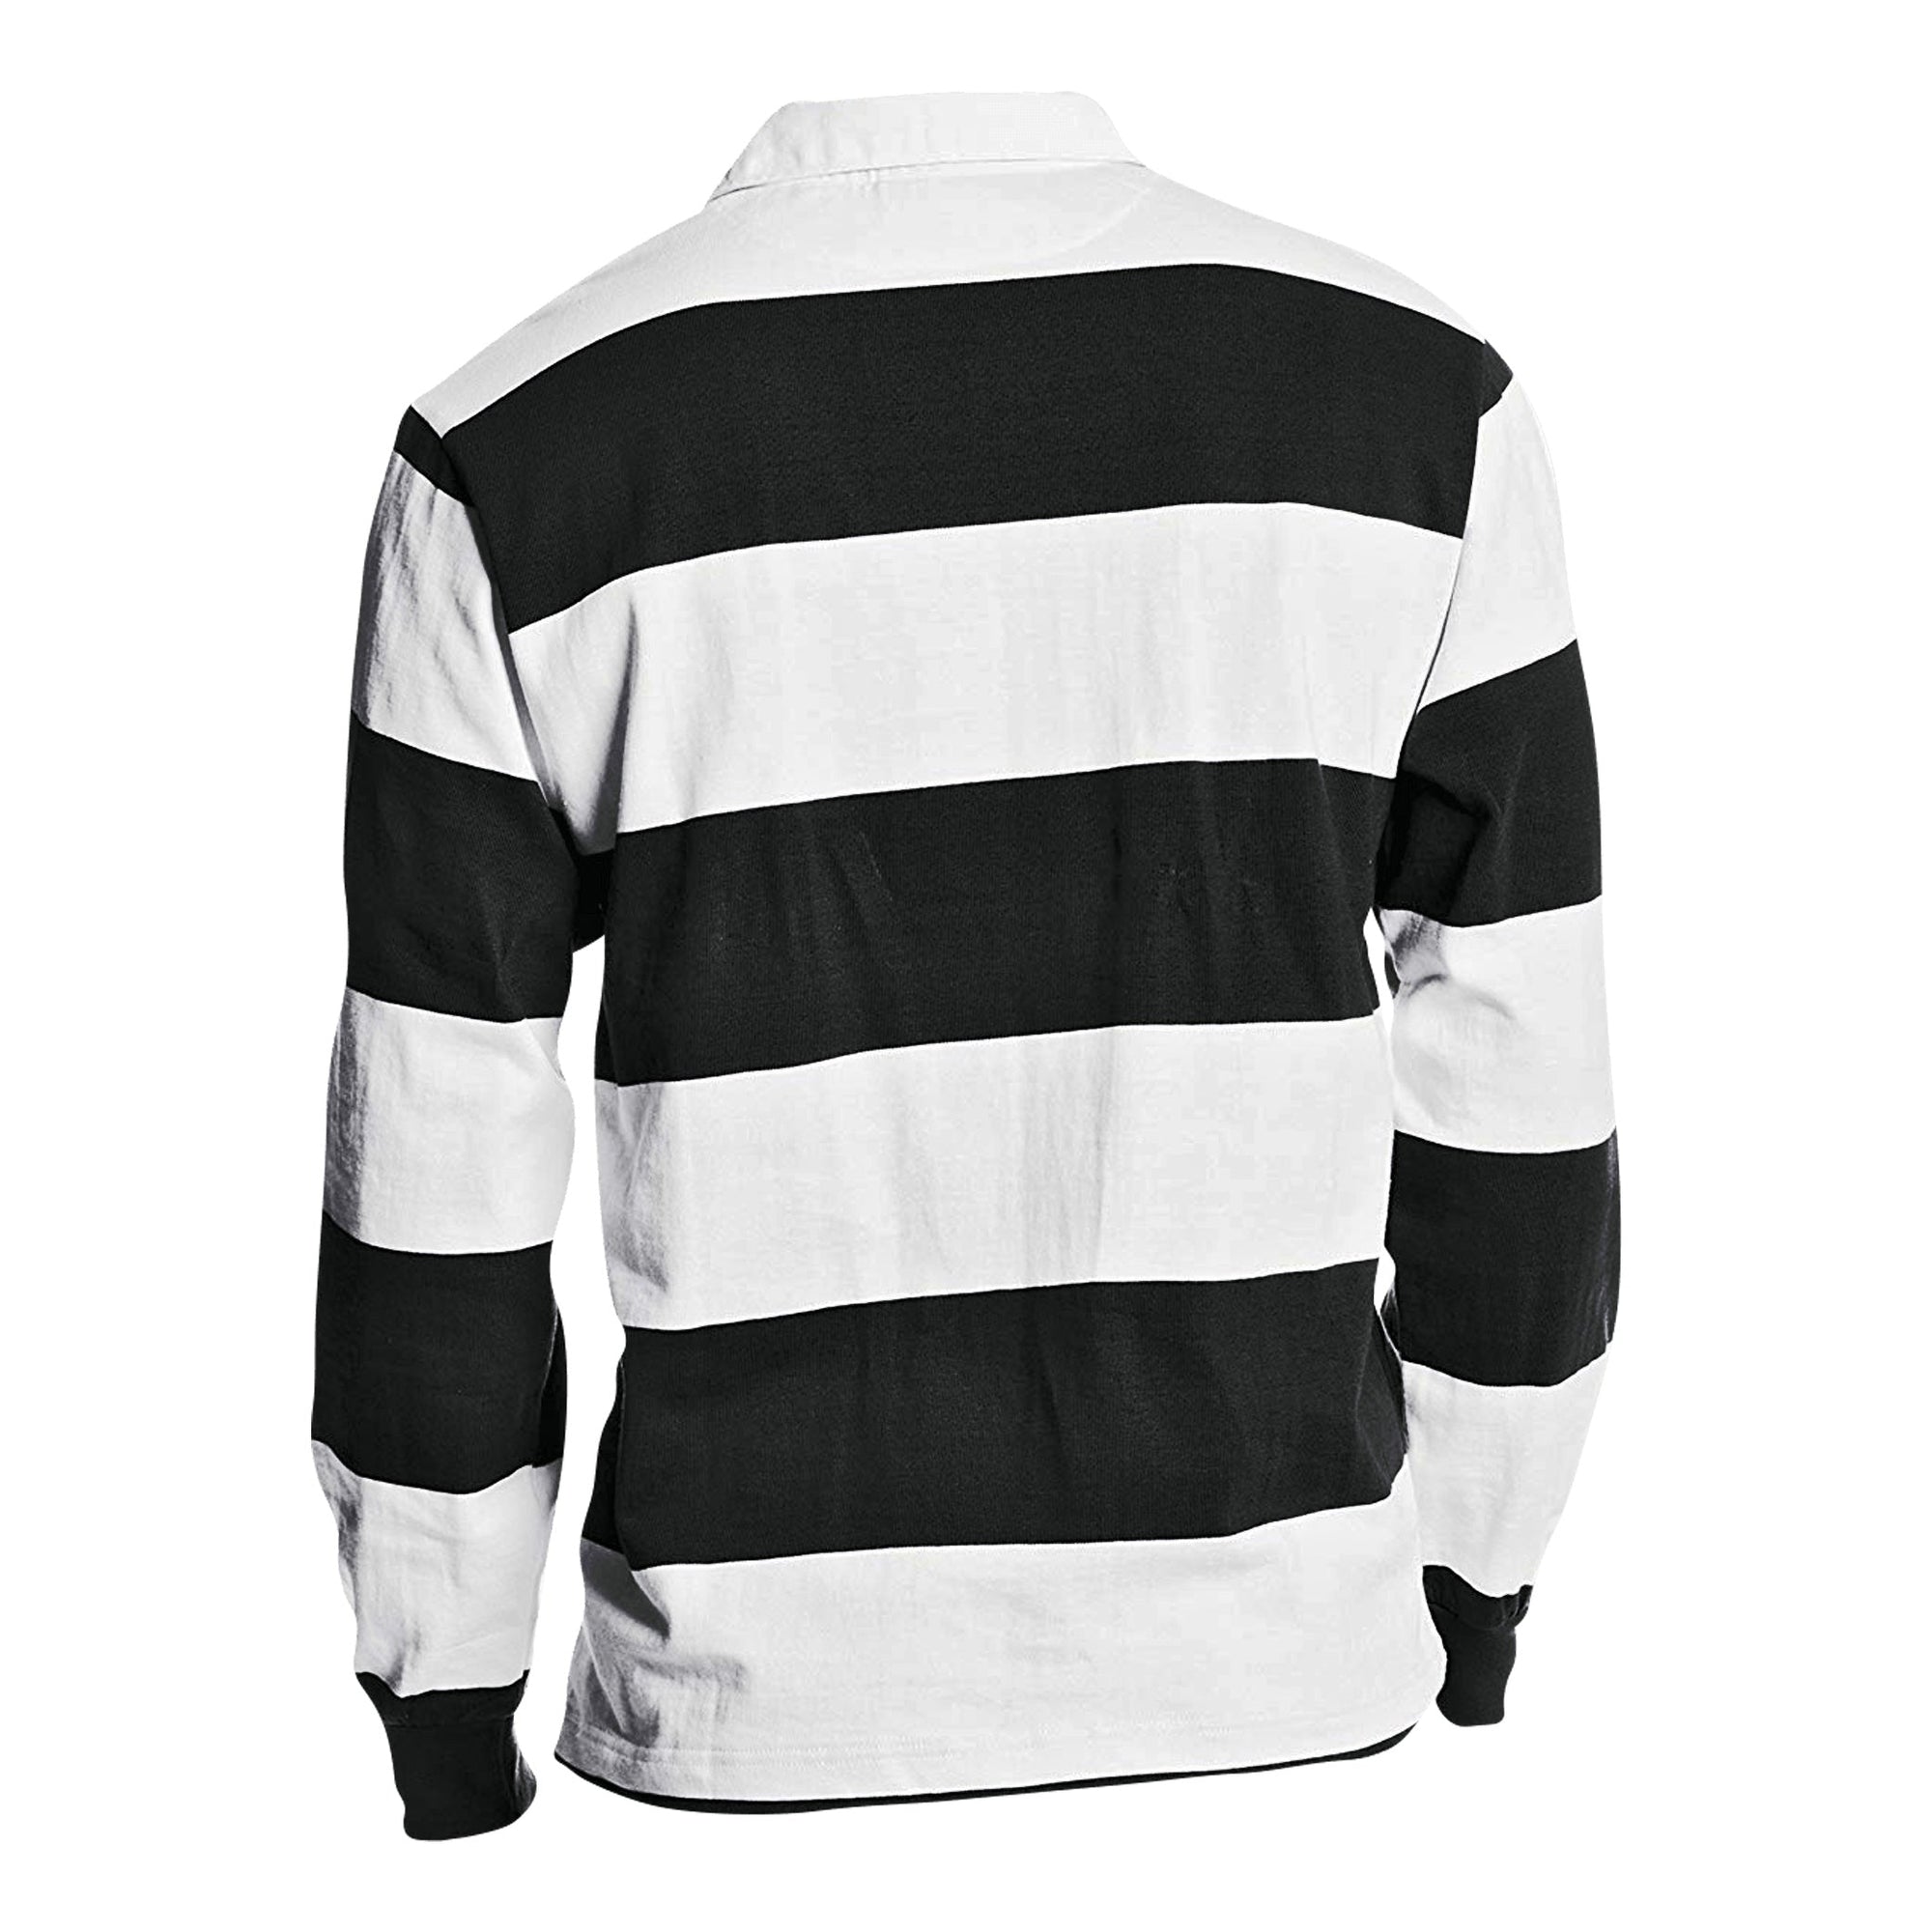 Rugby Imports Old Gold RFC Cotton Social Jersey